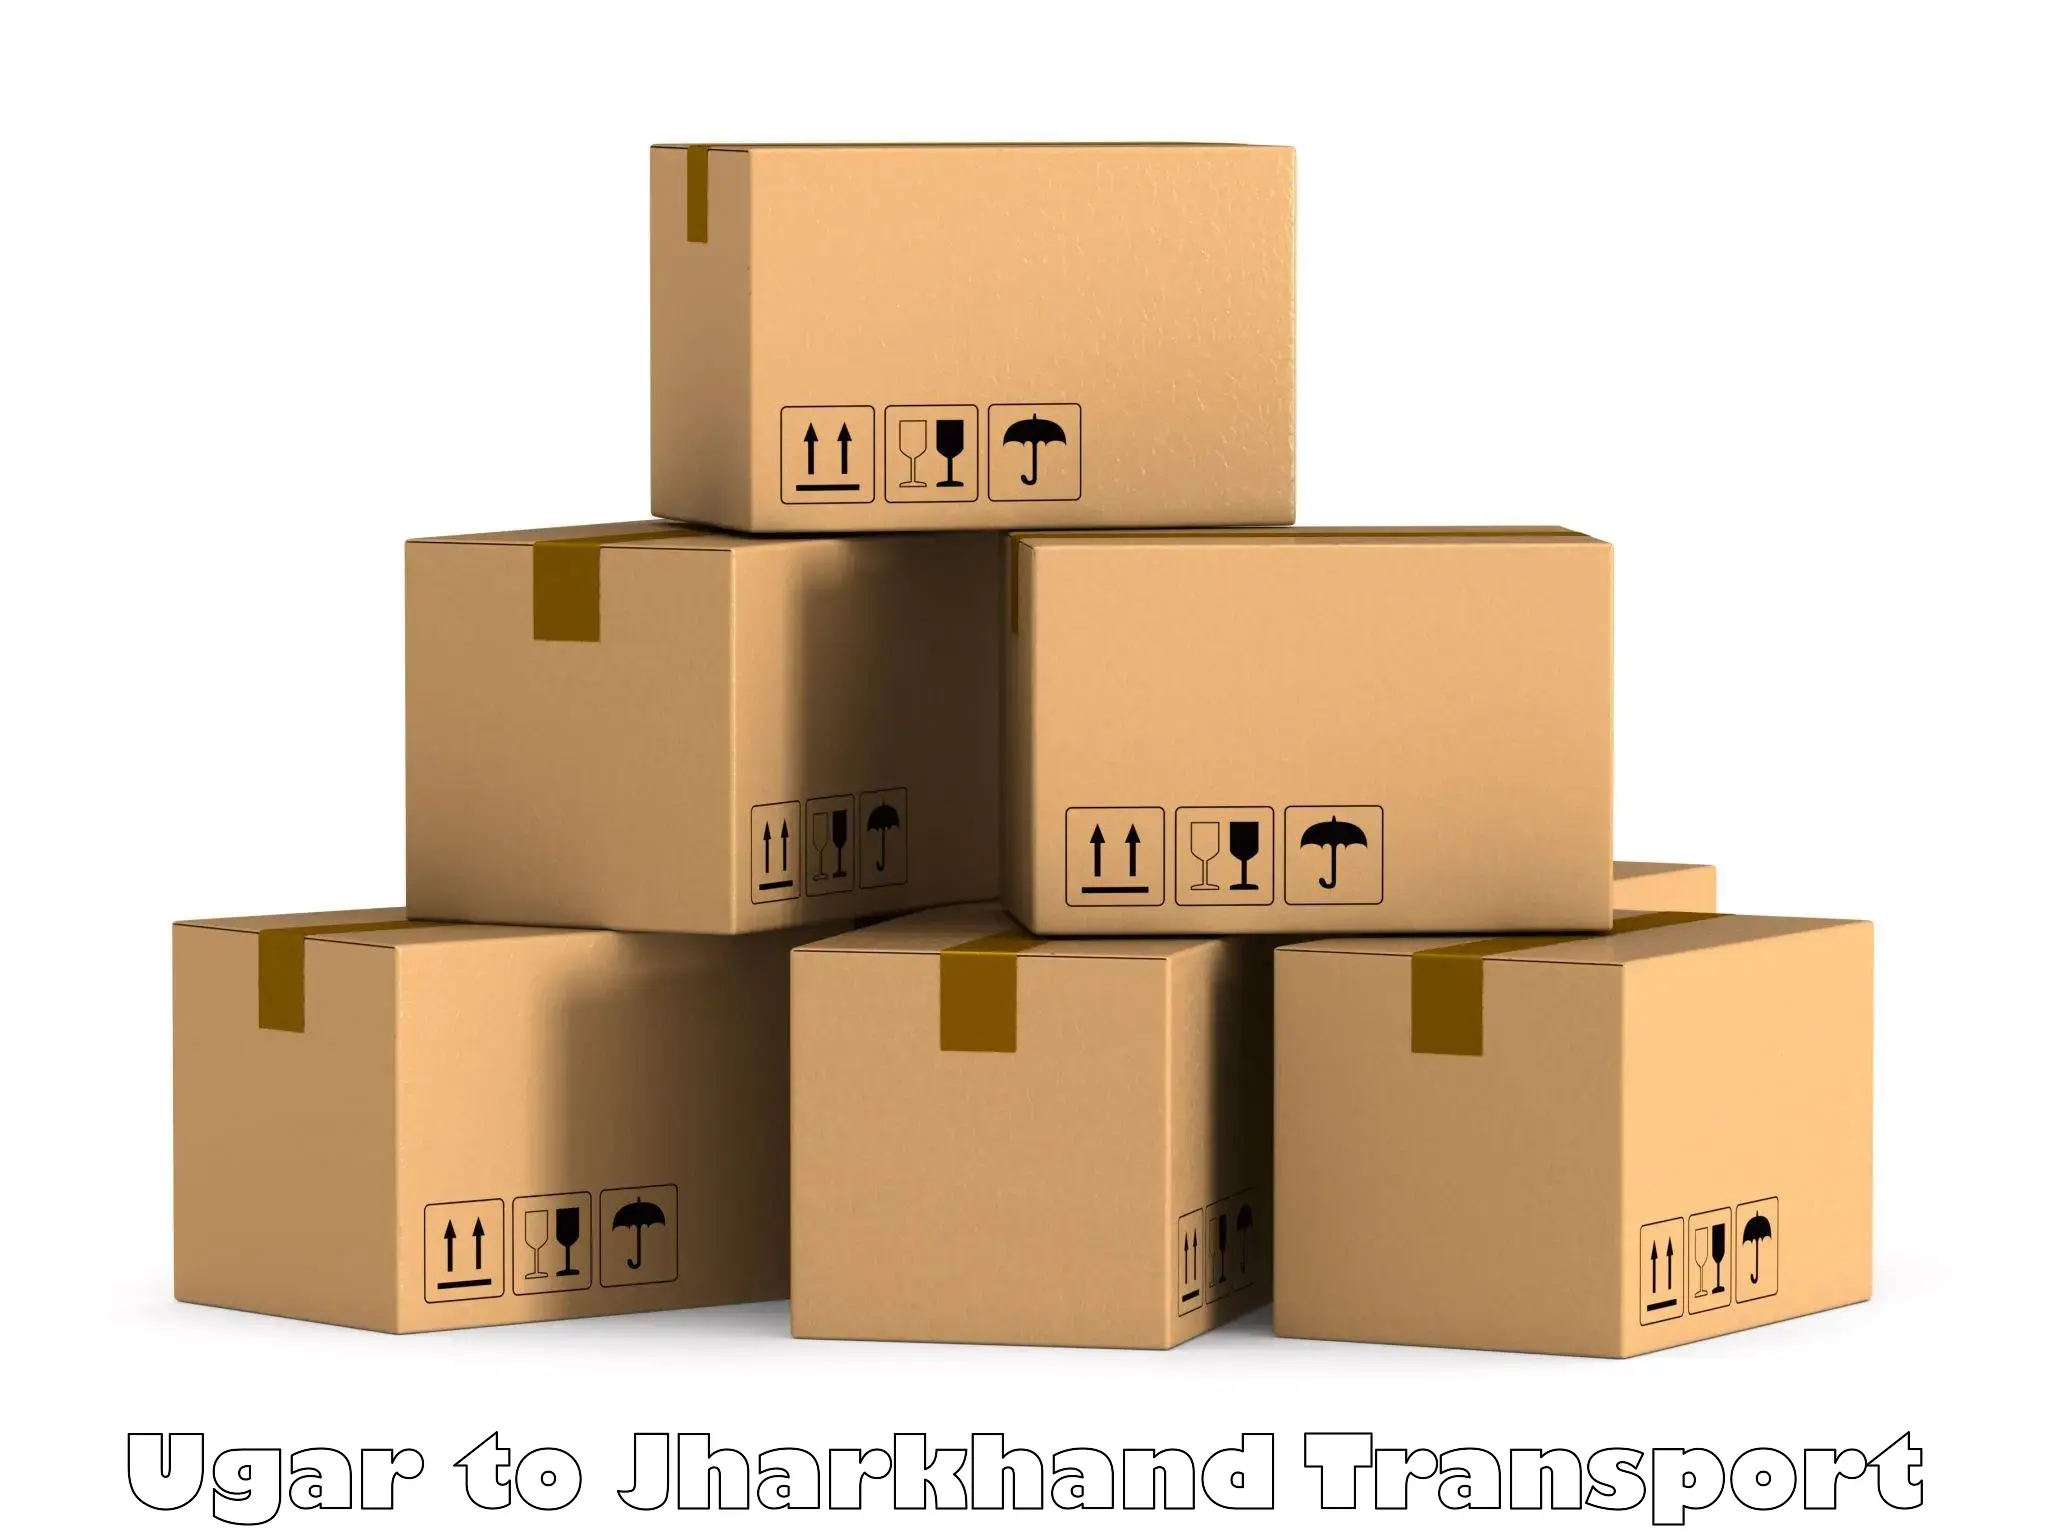 Container transportation services Ugar to Padma Hazaribagh